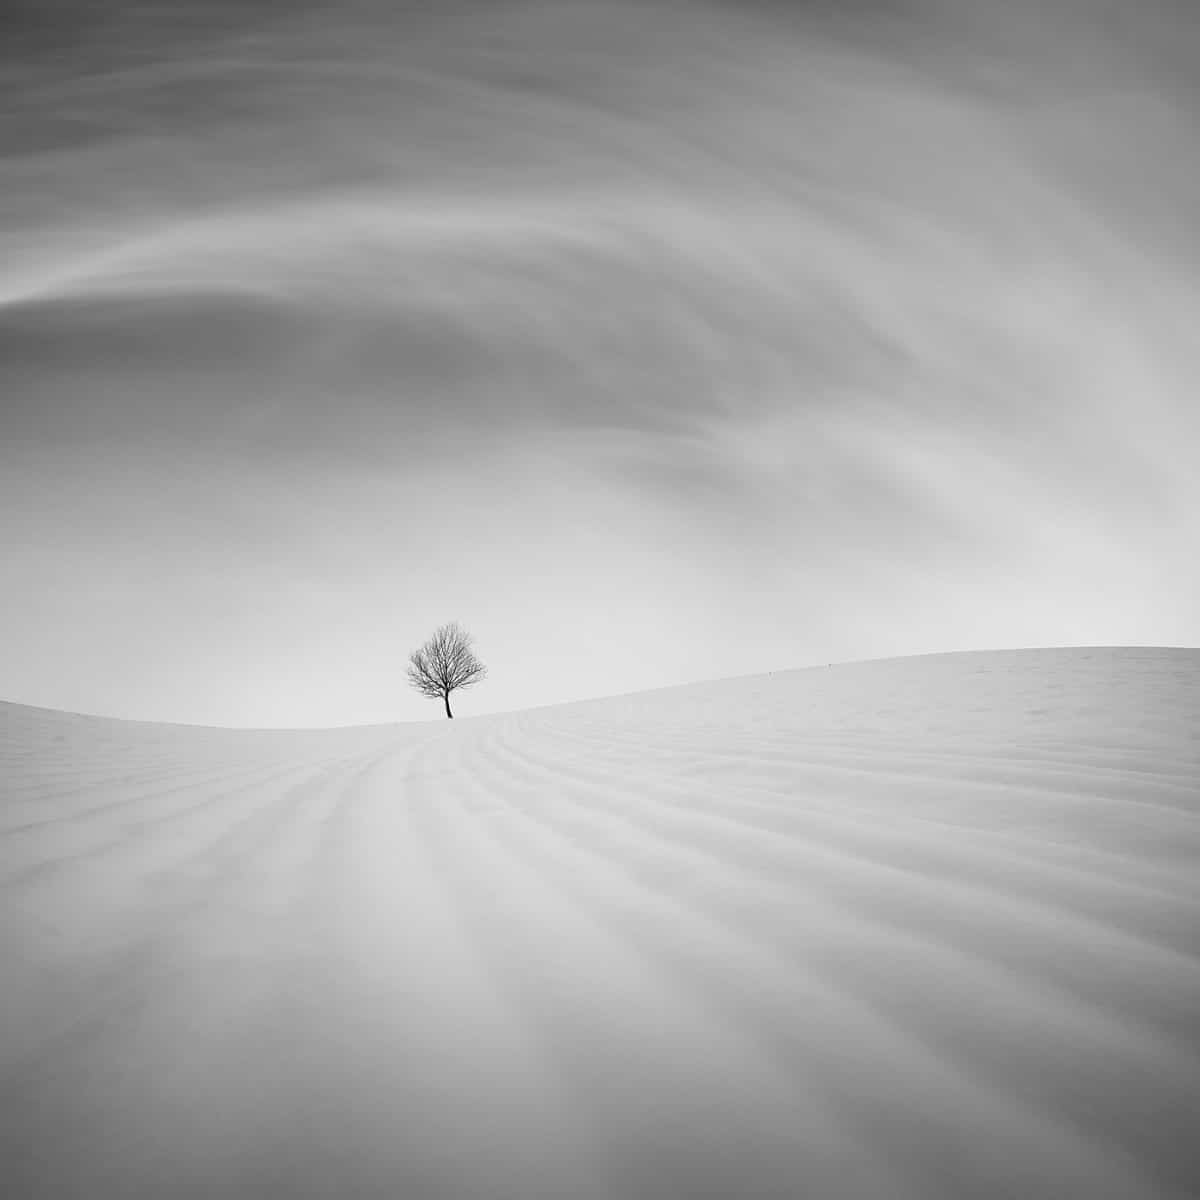 Solitary tree in a snowy landscape